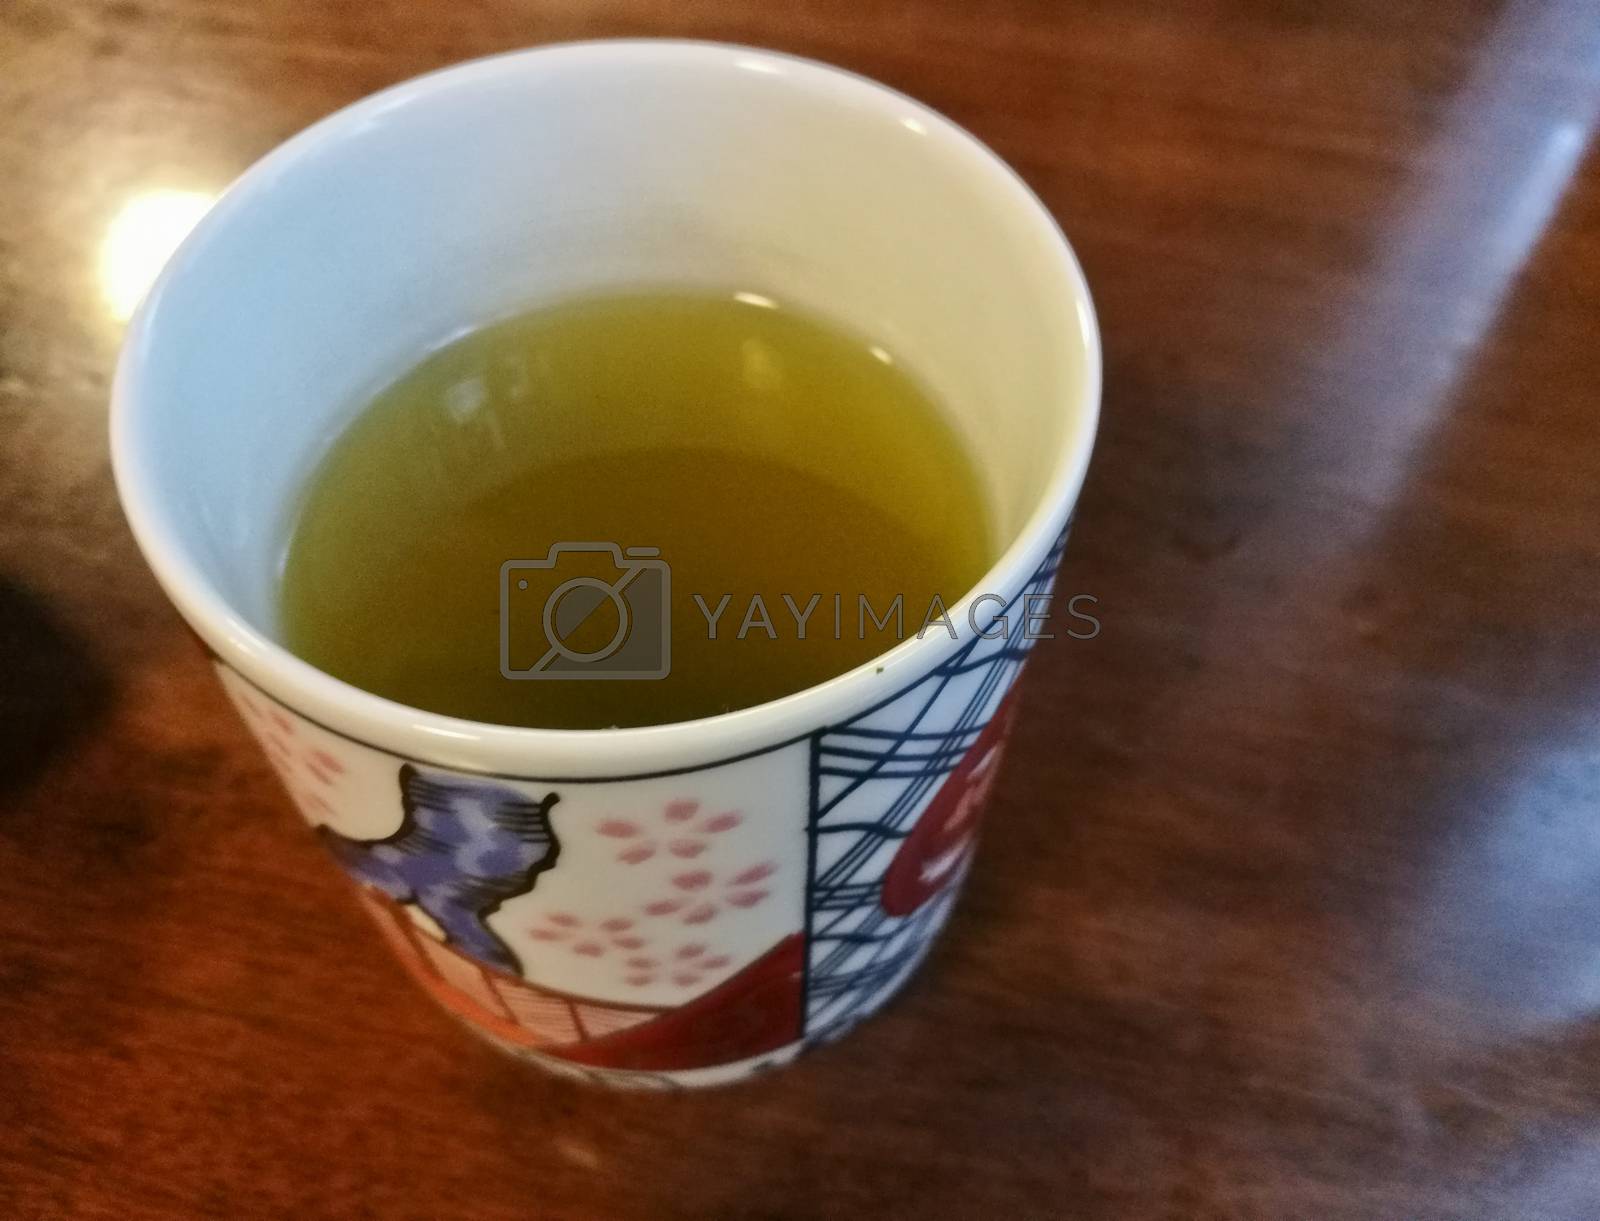 Royalty free image of Japanese matcha strong green tea on wooden table by eyeofpaul